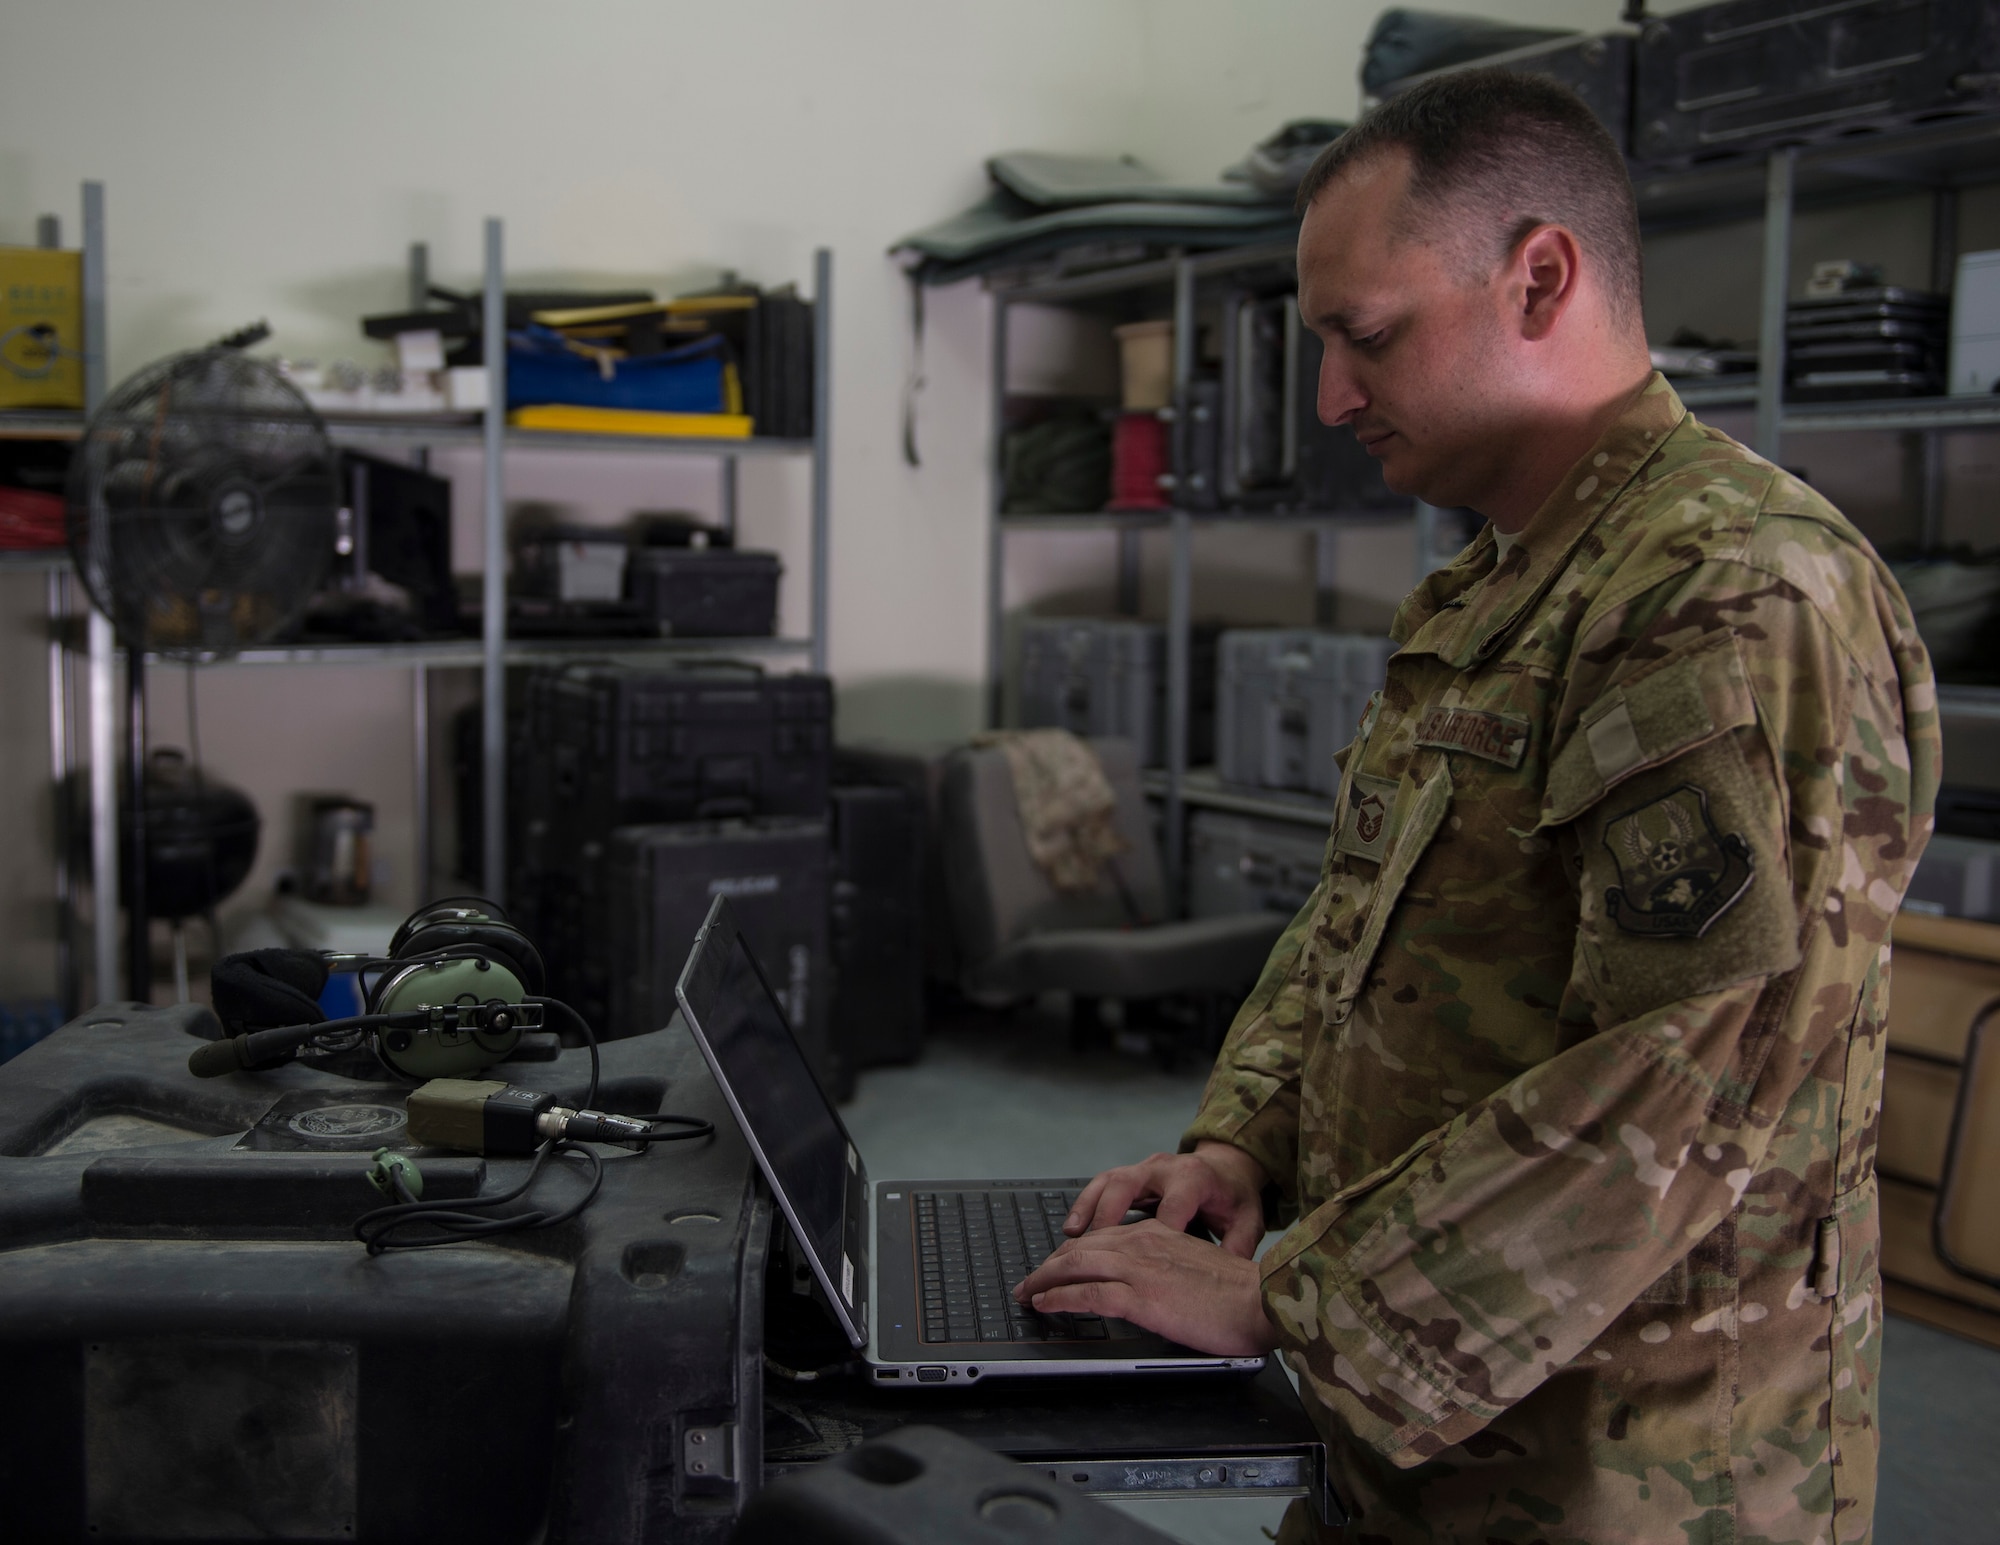 The Airborne Communication non-commissioned officer in charge with the 379th Expeditionary Communication Squadron performs a system check on equipment at Al Udeid Air Base, Qatar, July 14, 2017.